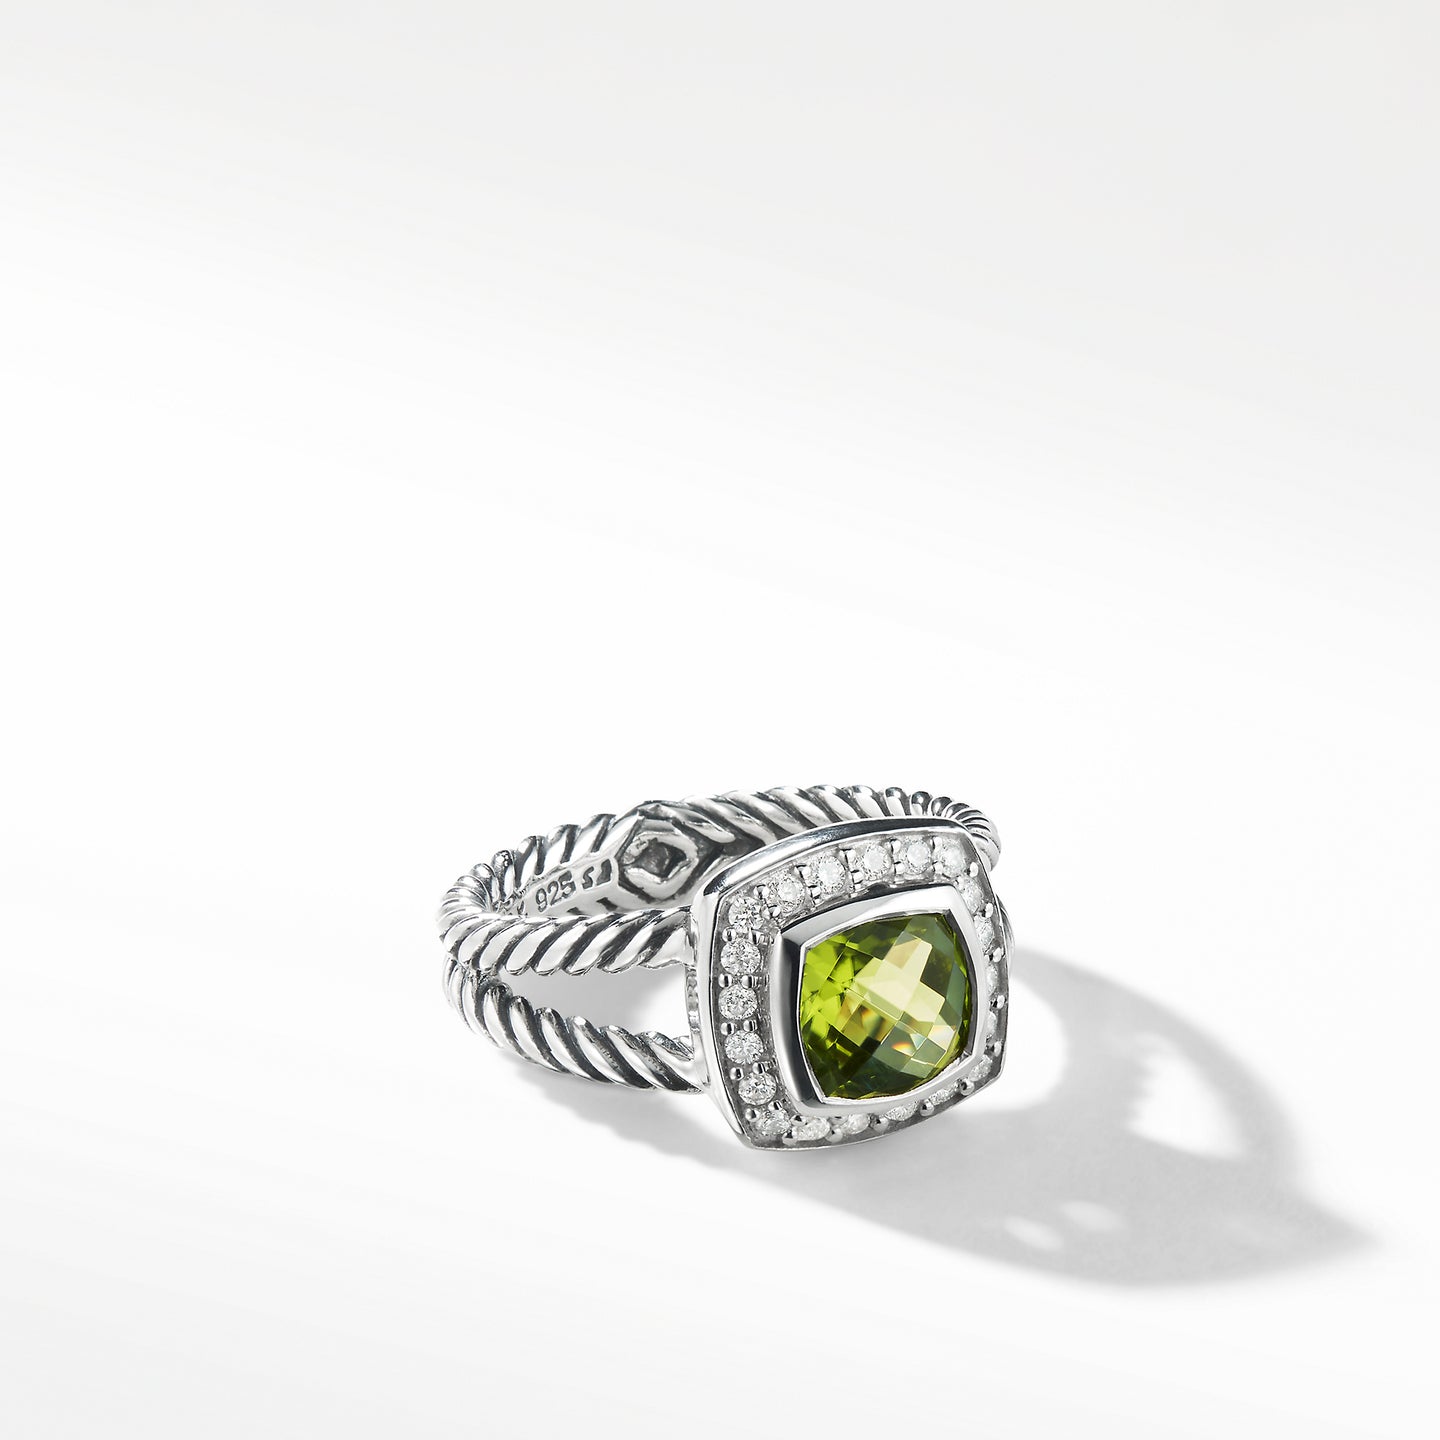 Petite Albion® Ring with Peridot and Diamonds, Size 7